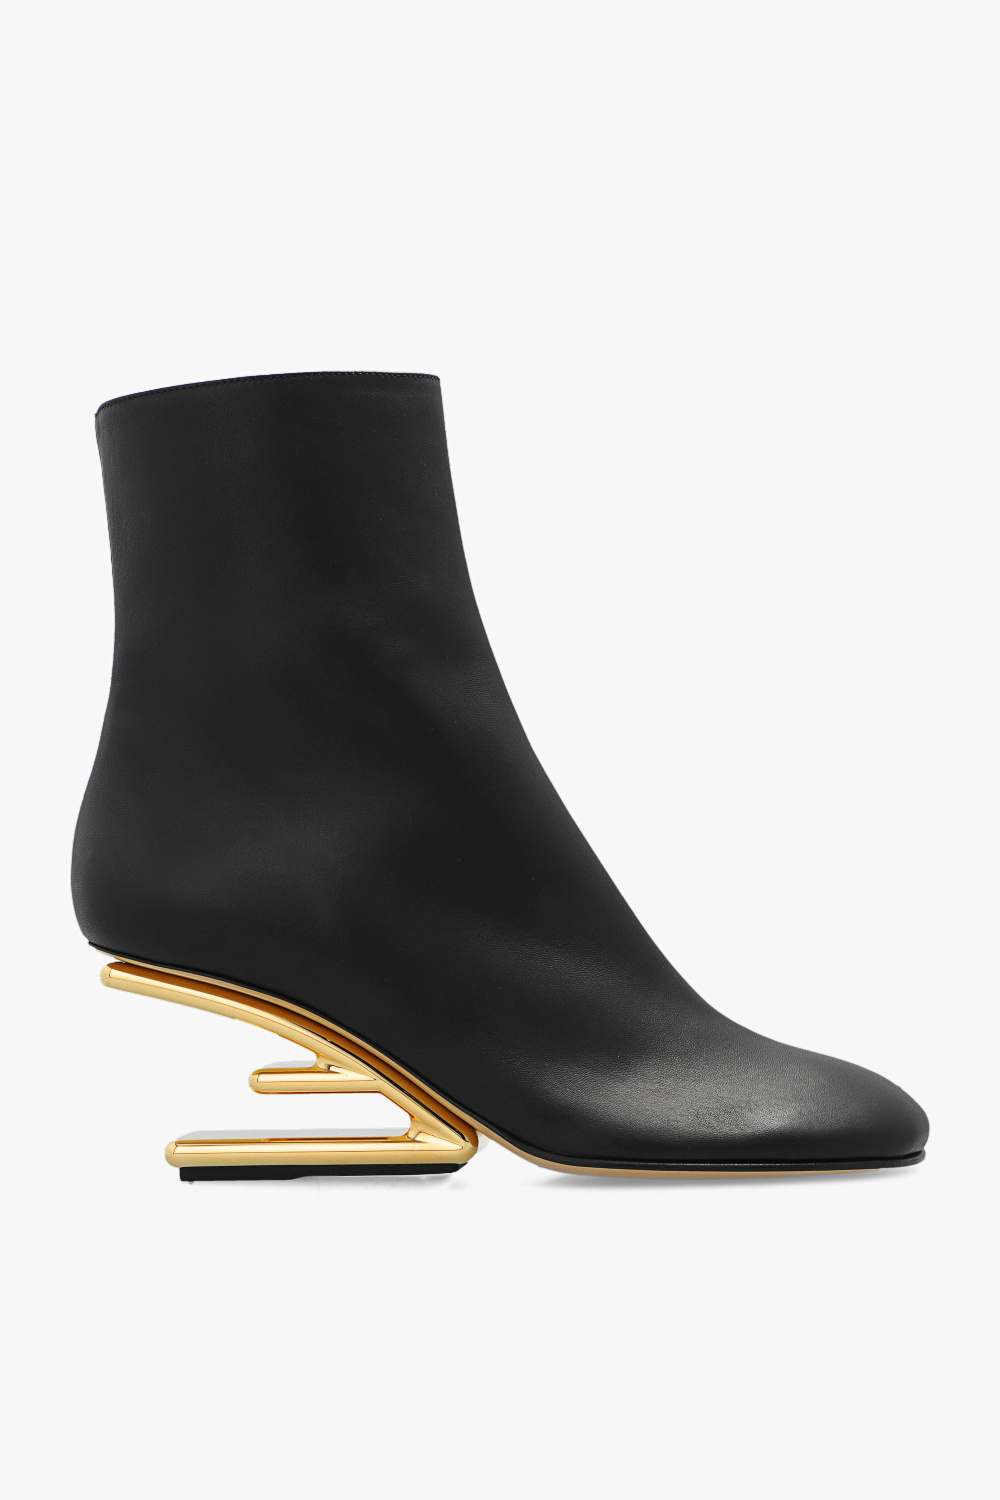 Fendi ‘Faster’ heeled ankle boots